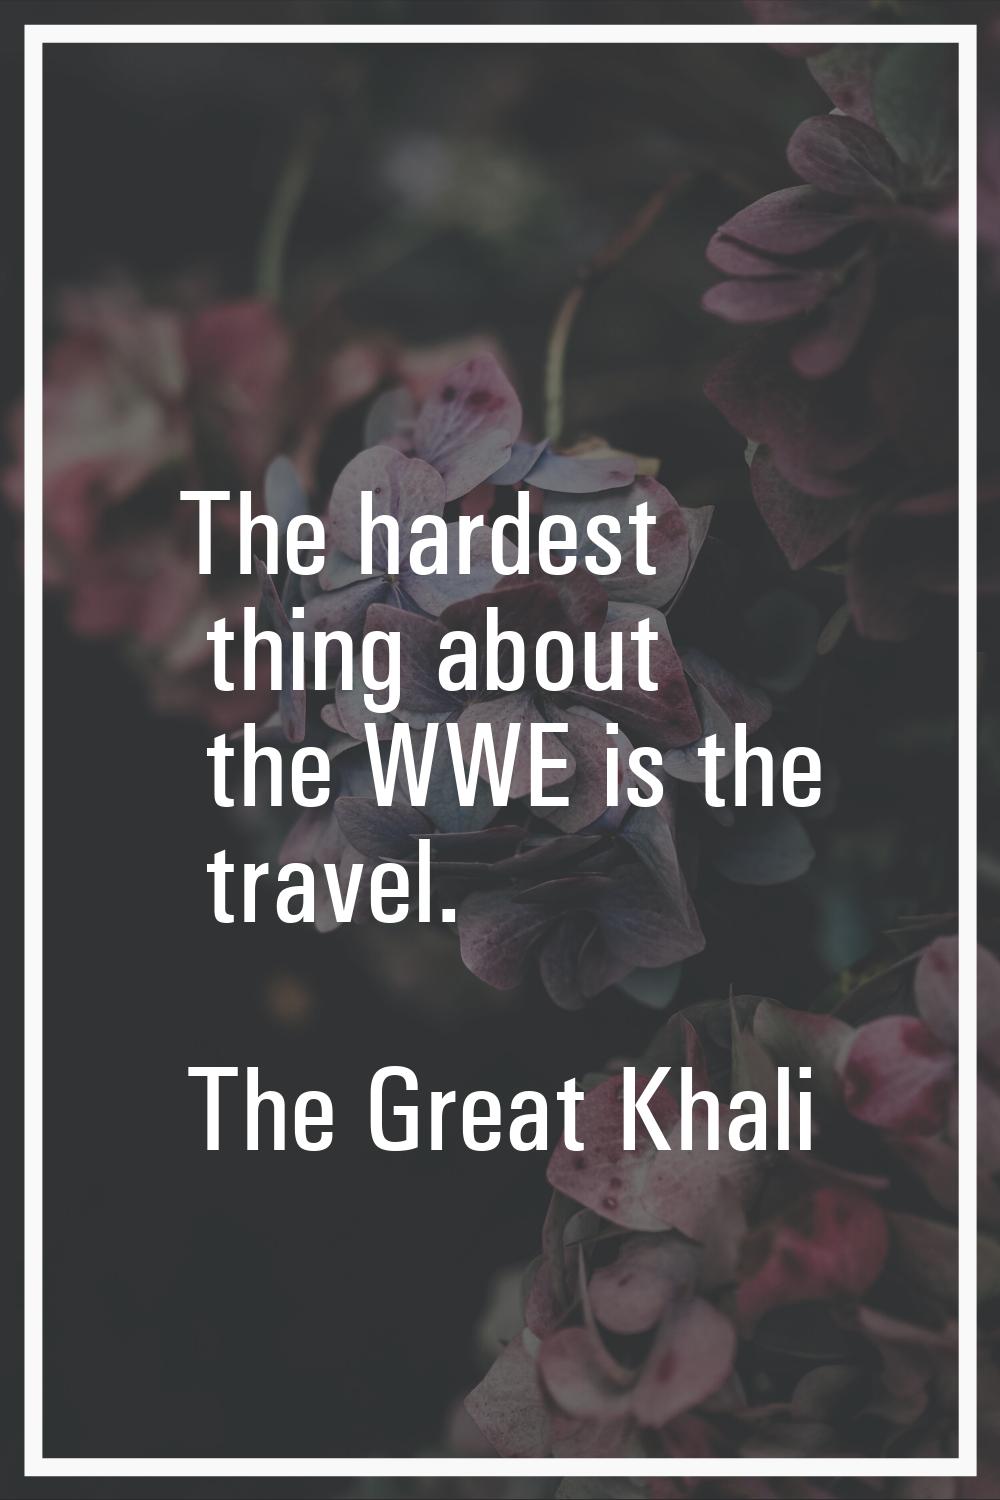 The hardest thing about the WWE is the travel.